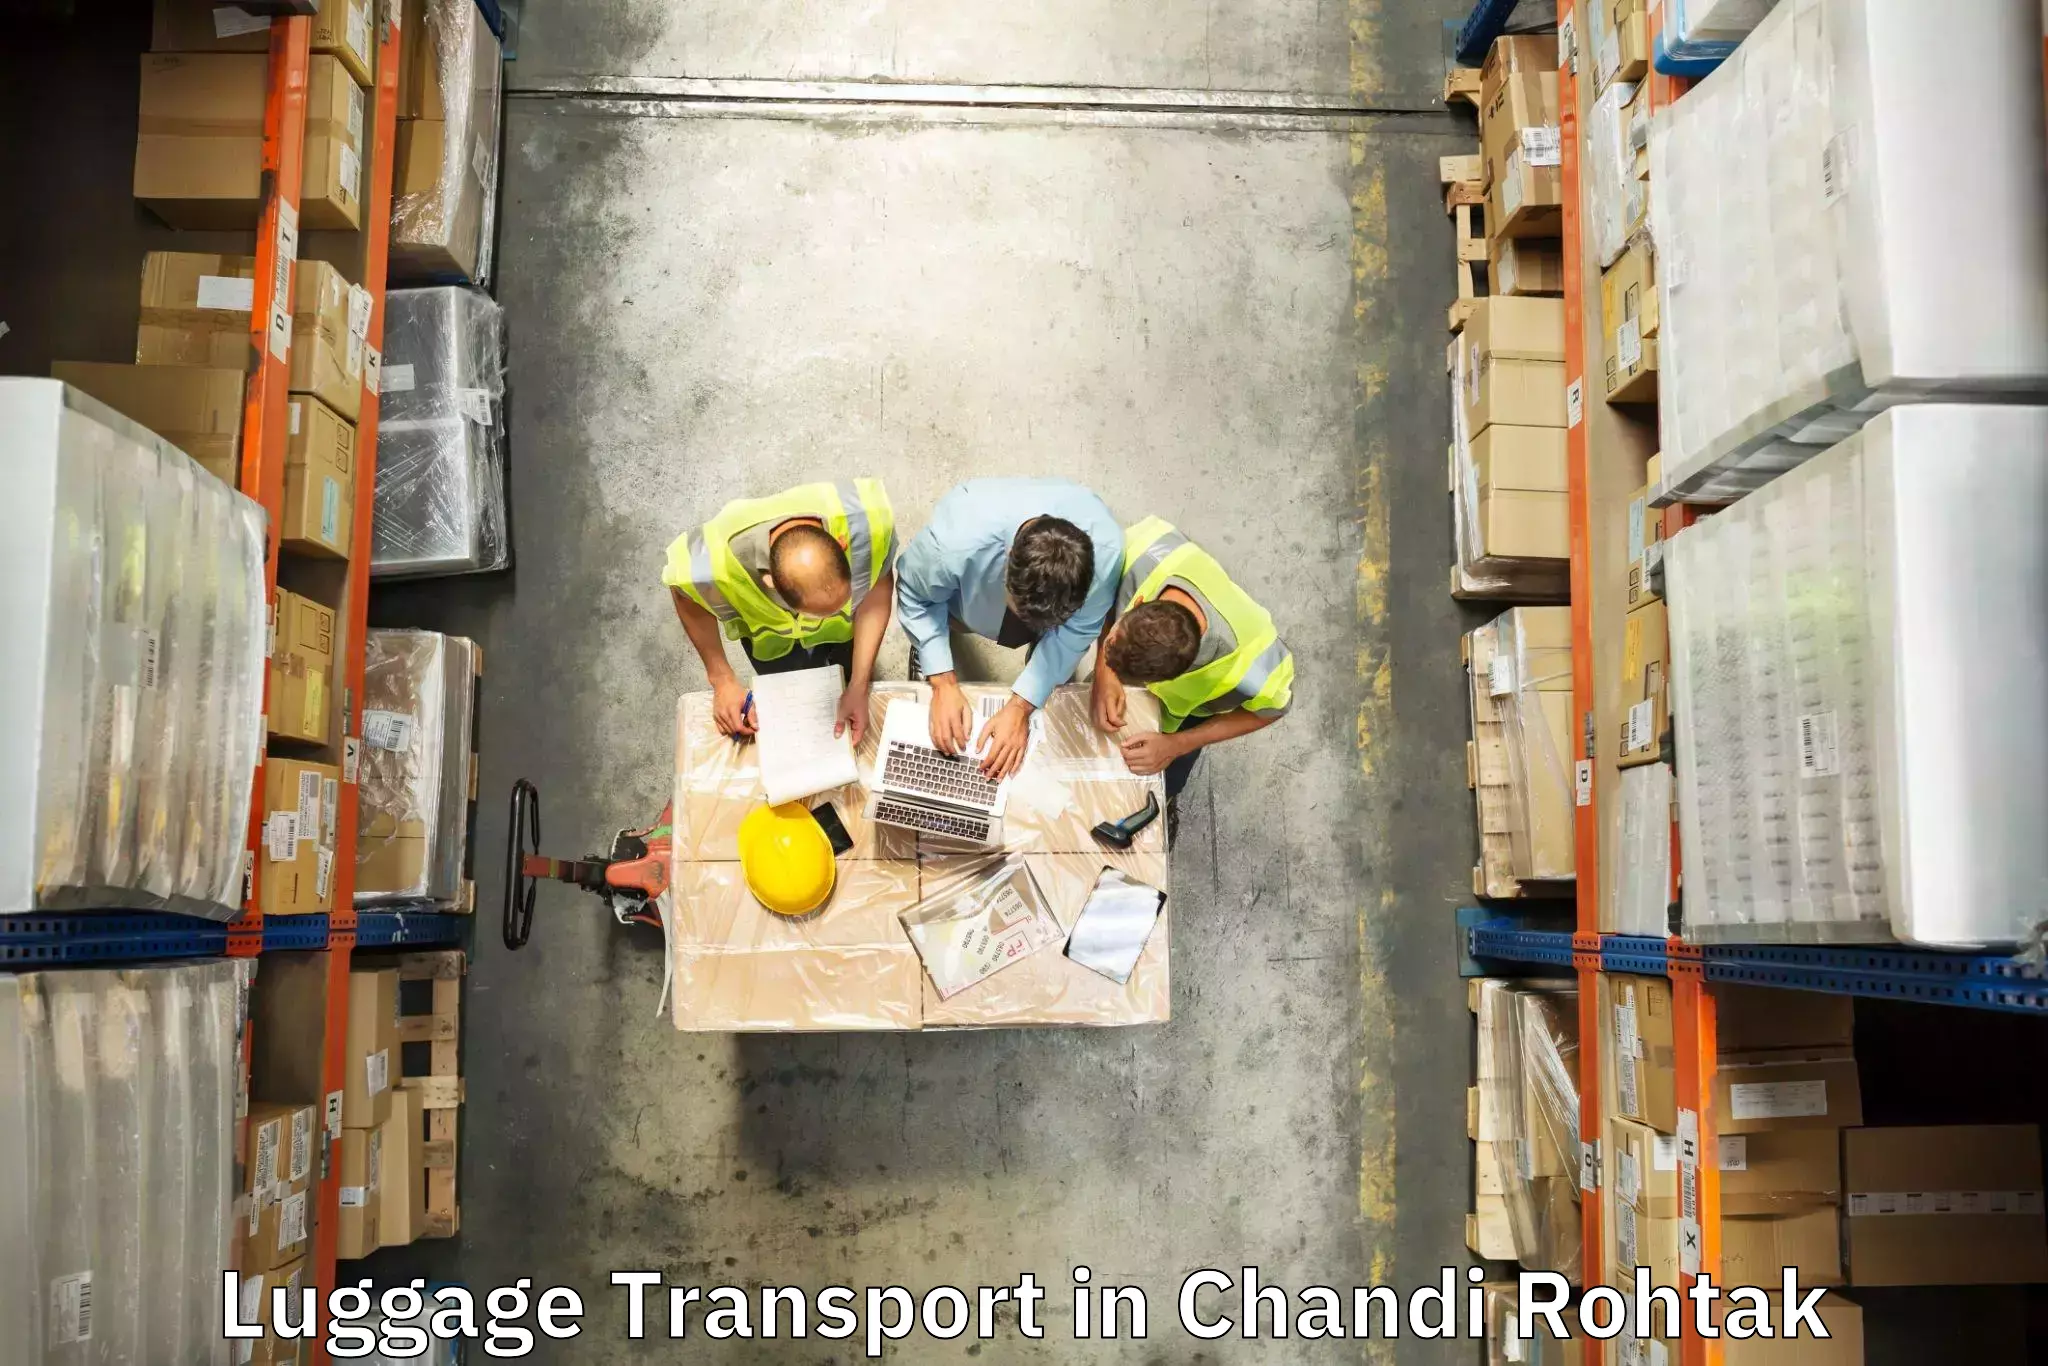 Baggage transport services in Chandi Rohtak